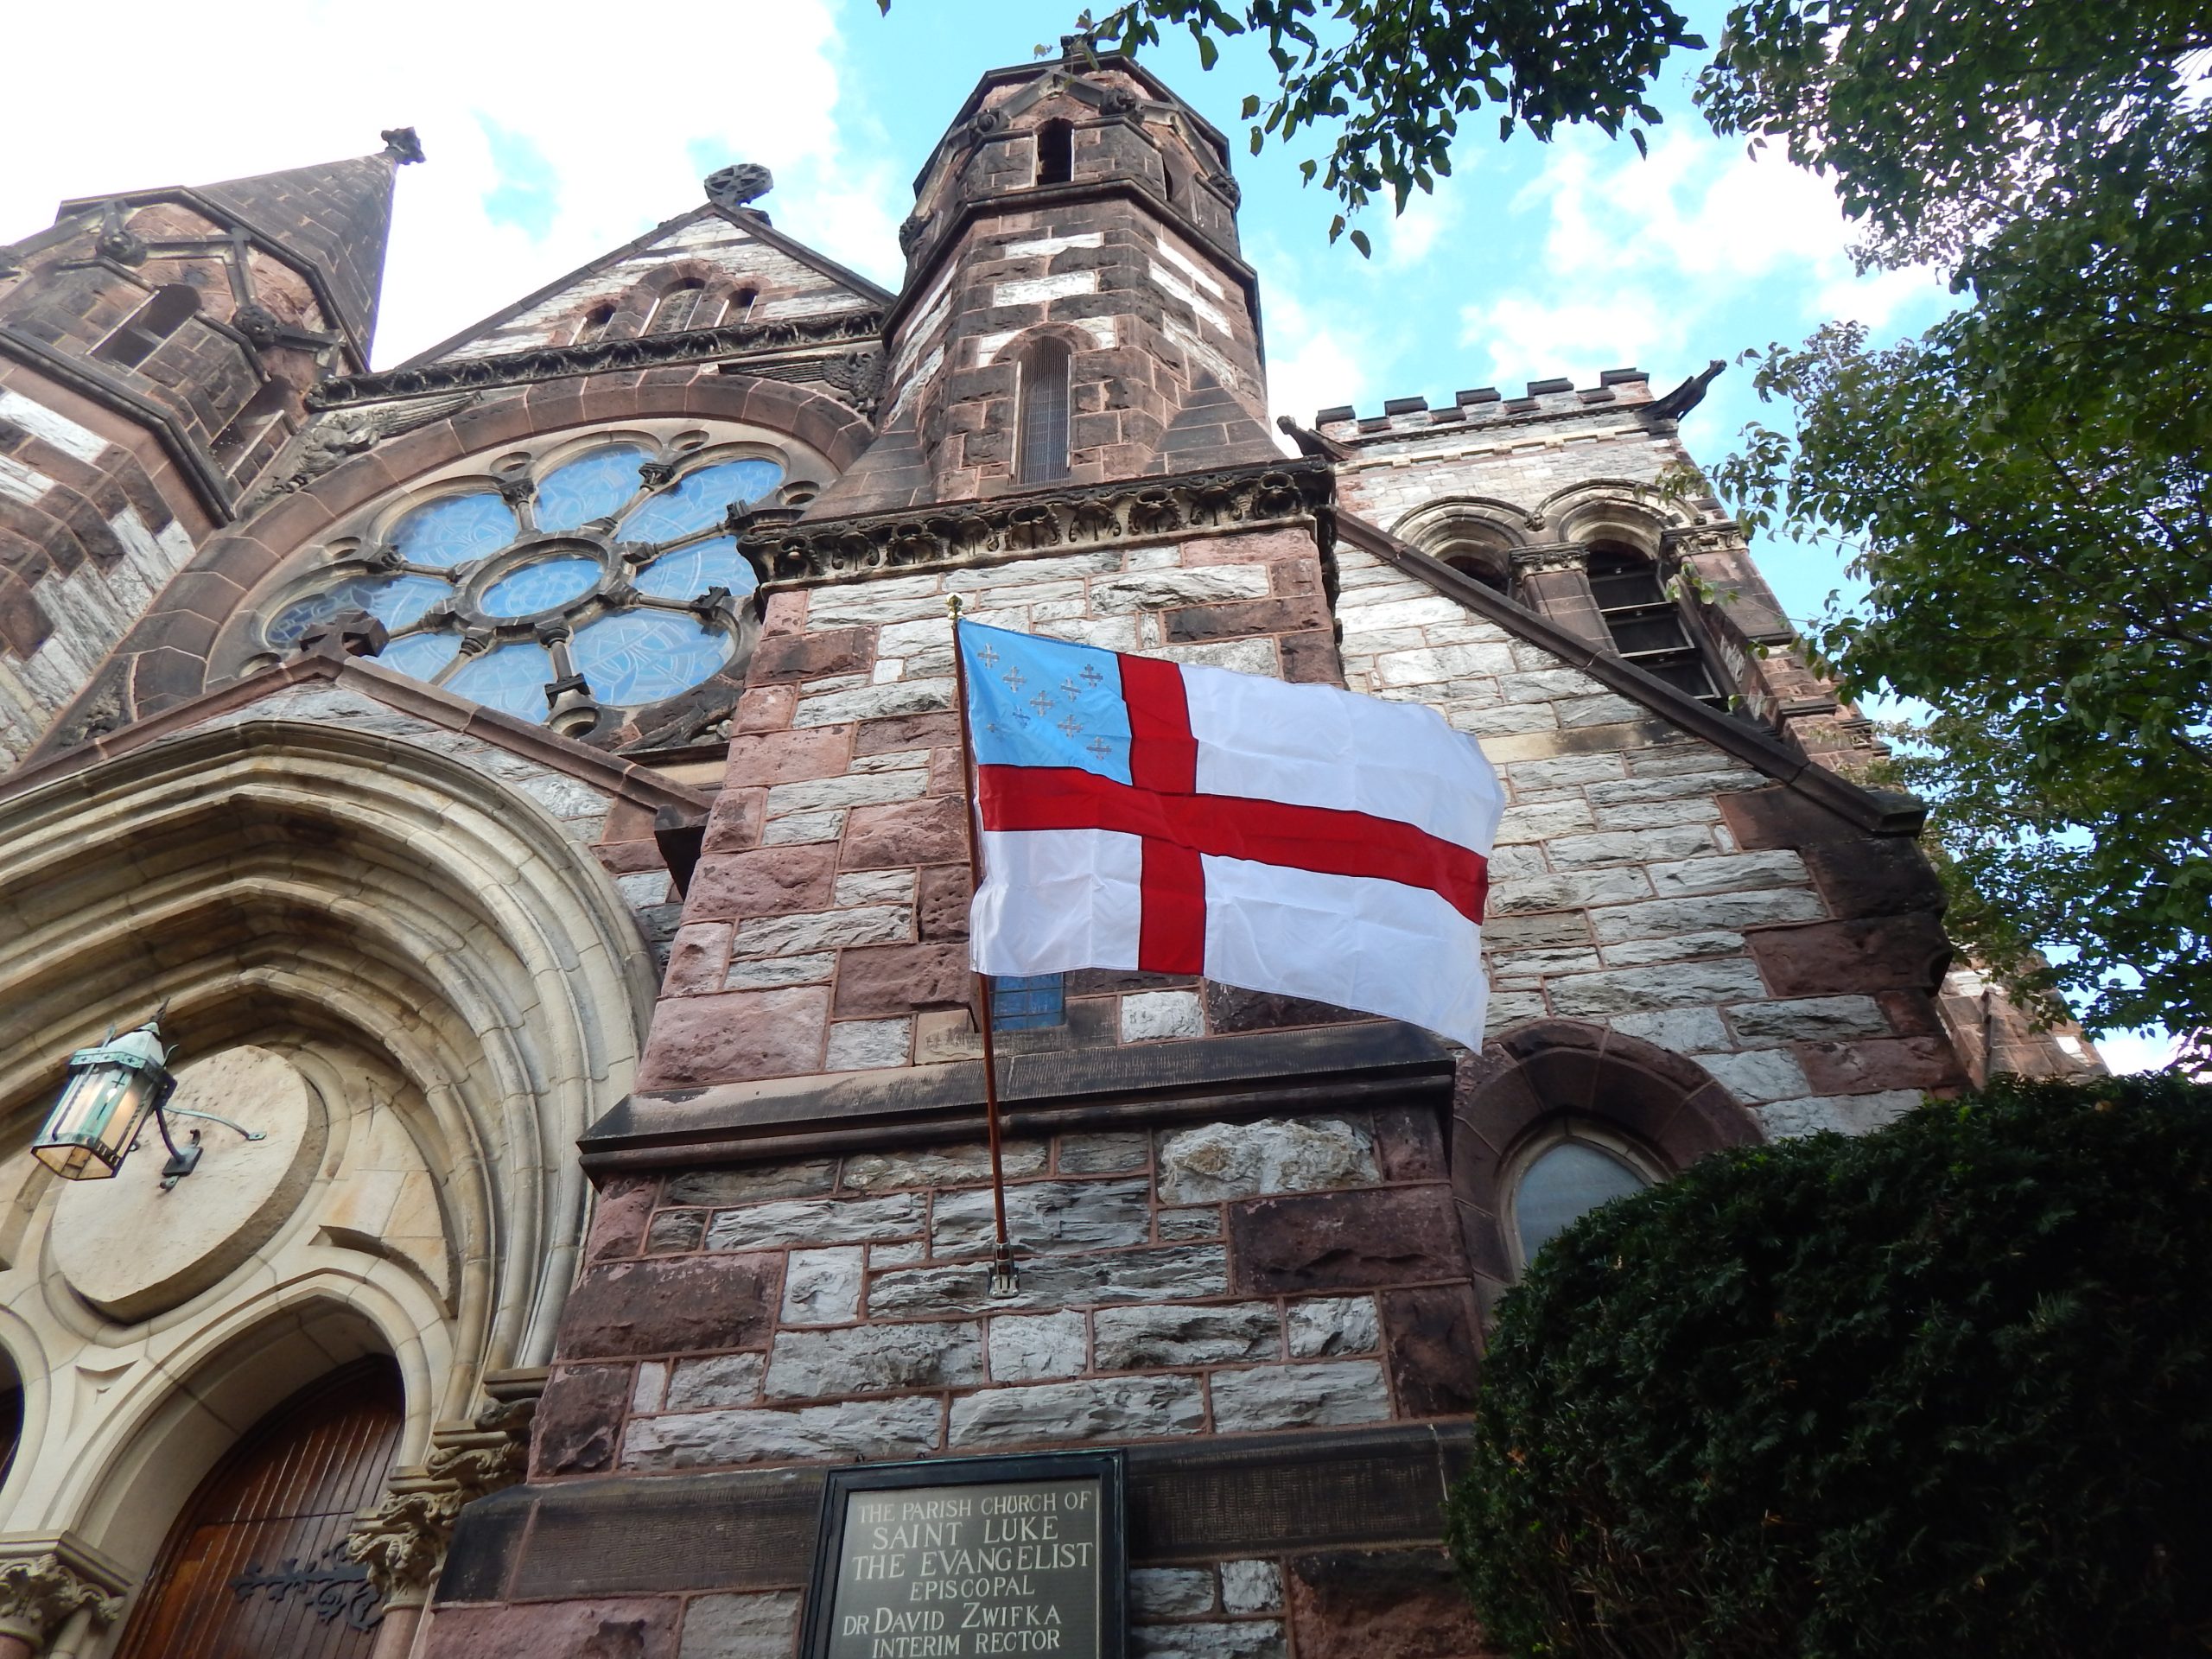 exterior of stone church with episcopal flag